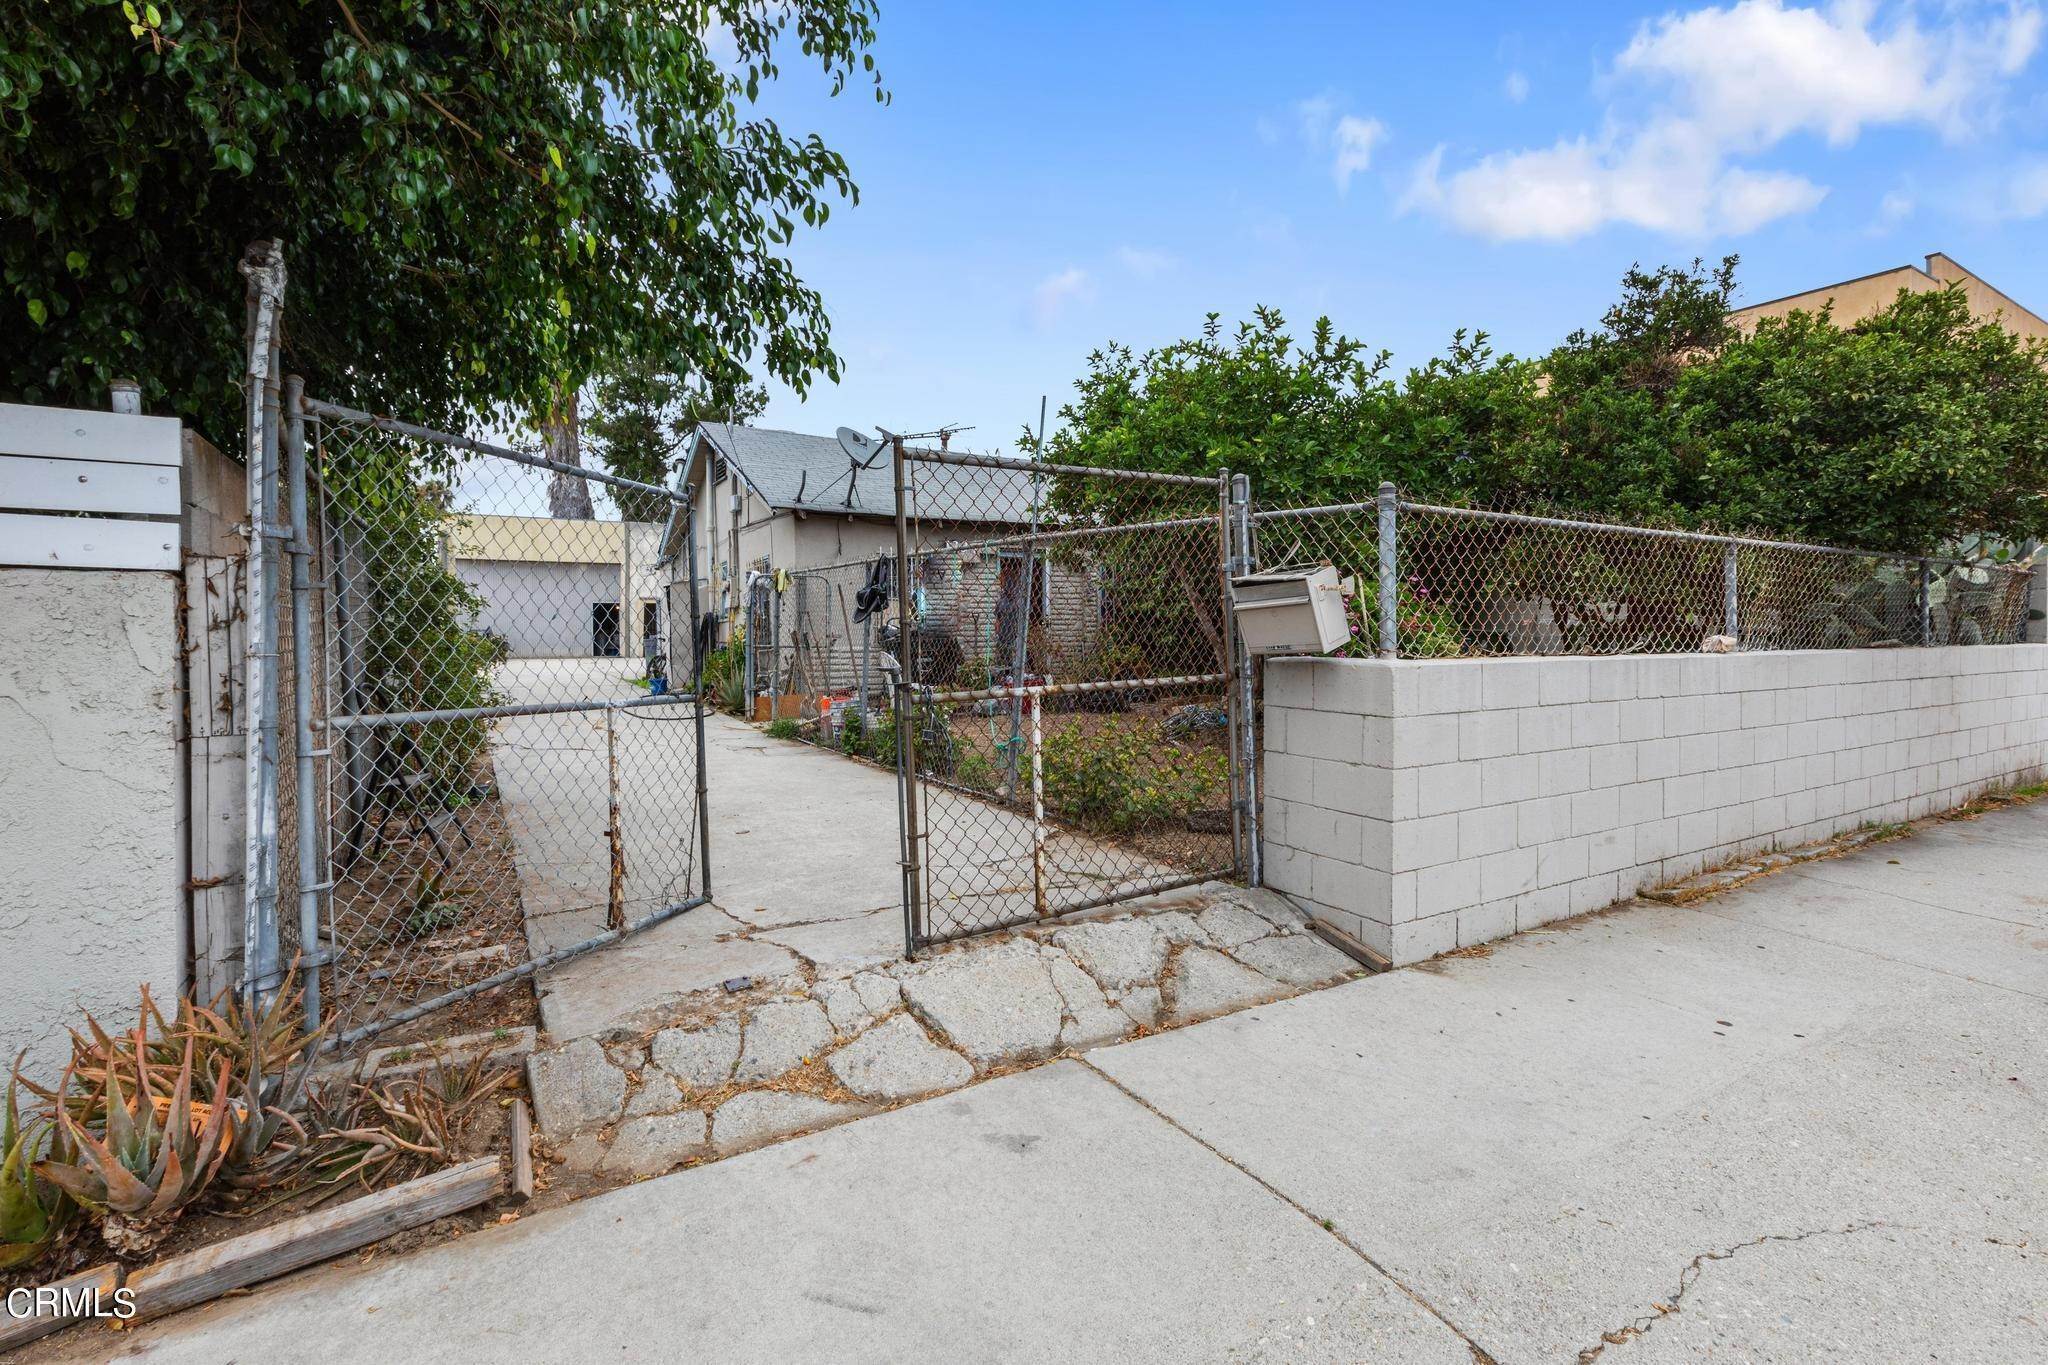 12. Townhouse Mixed Use for Sale at 1337 West 228th Street Los Angeles, California 90501 United States